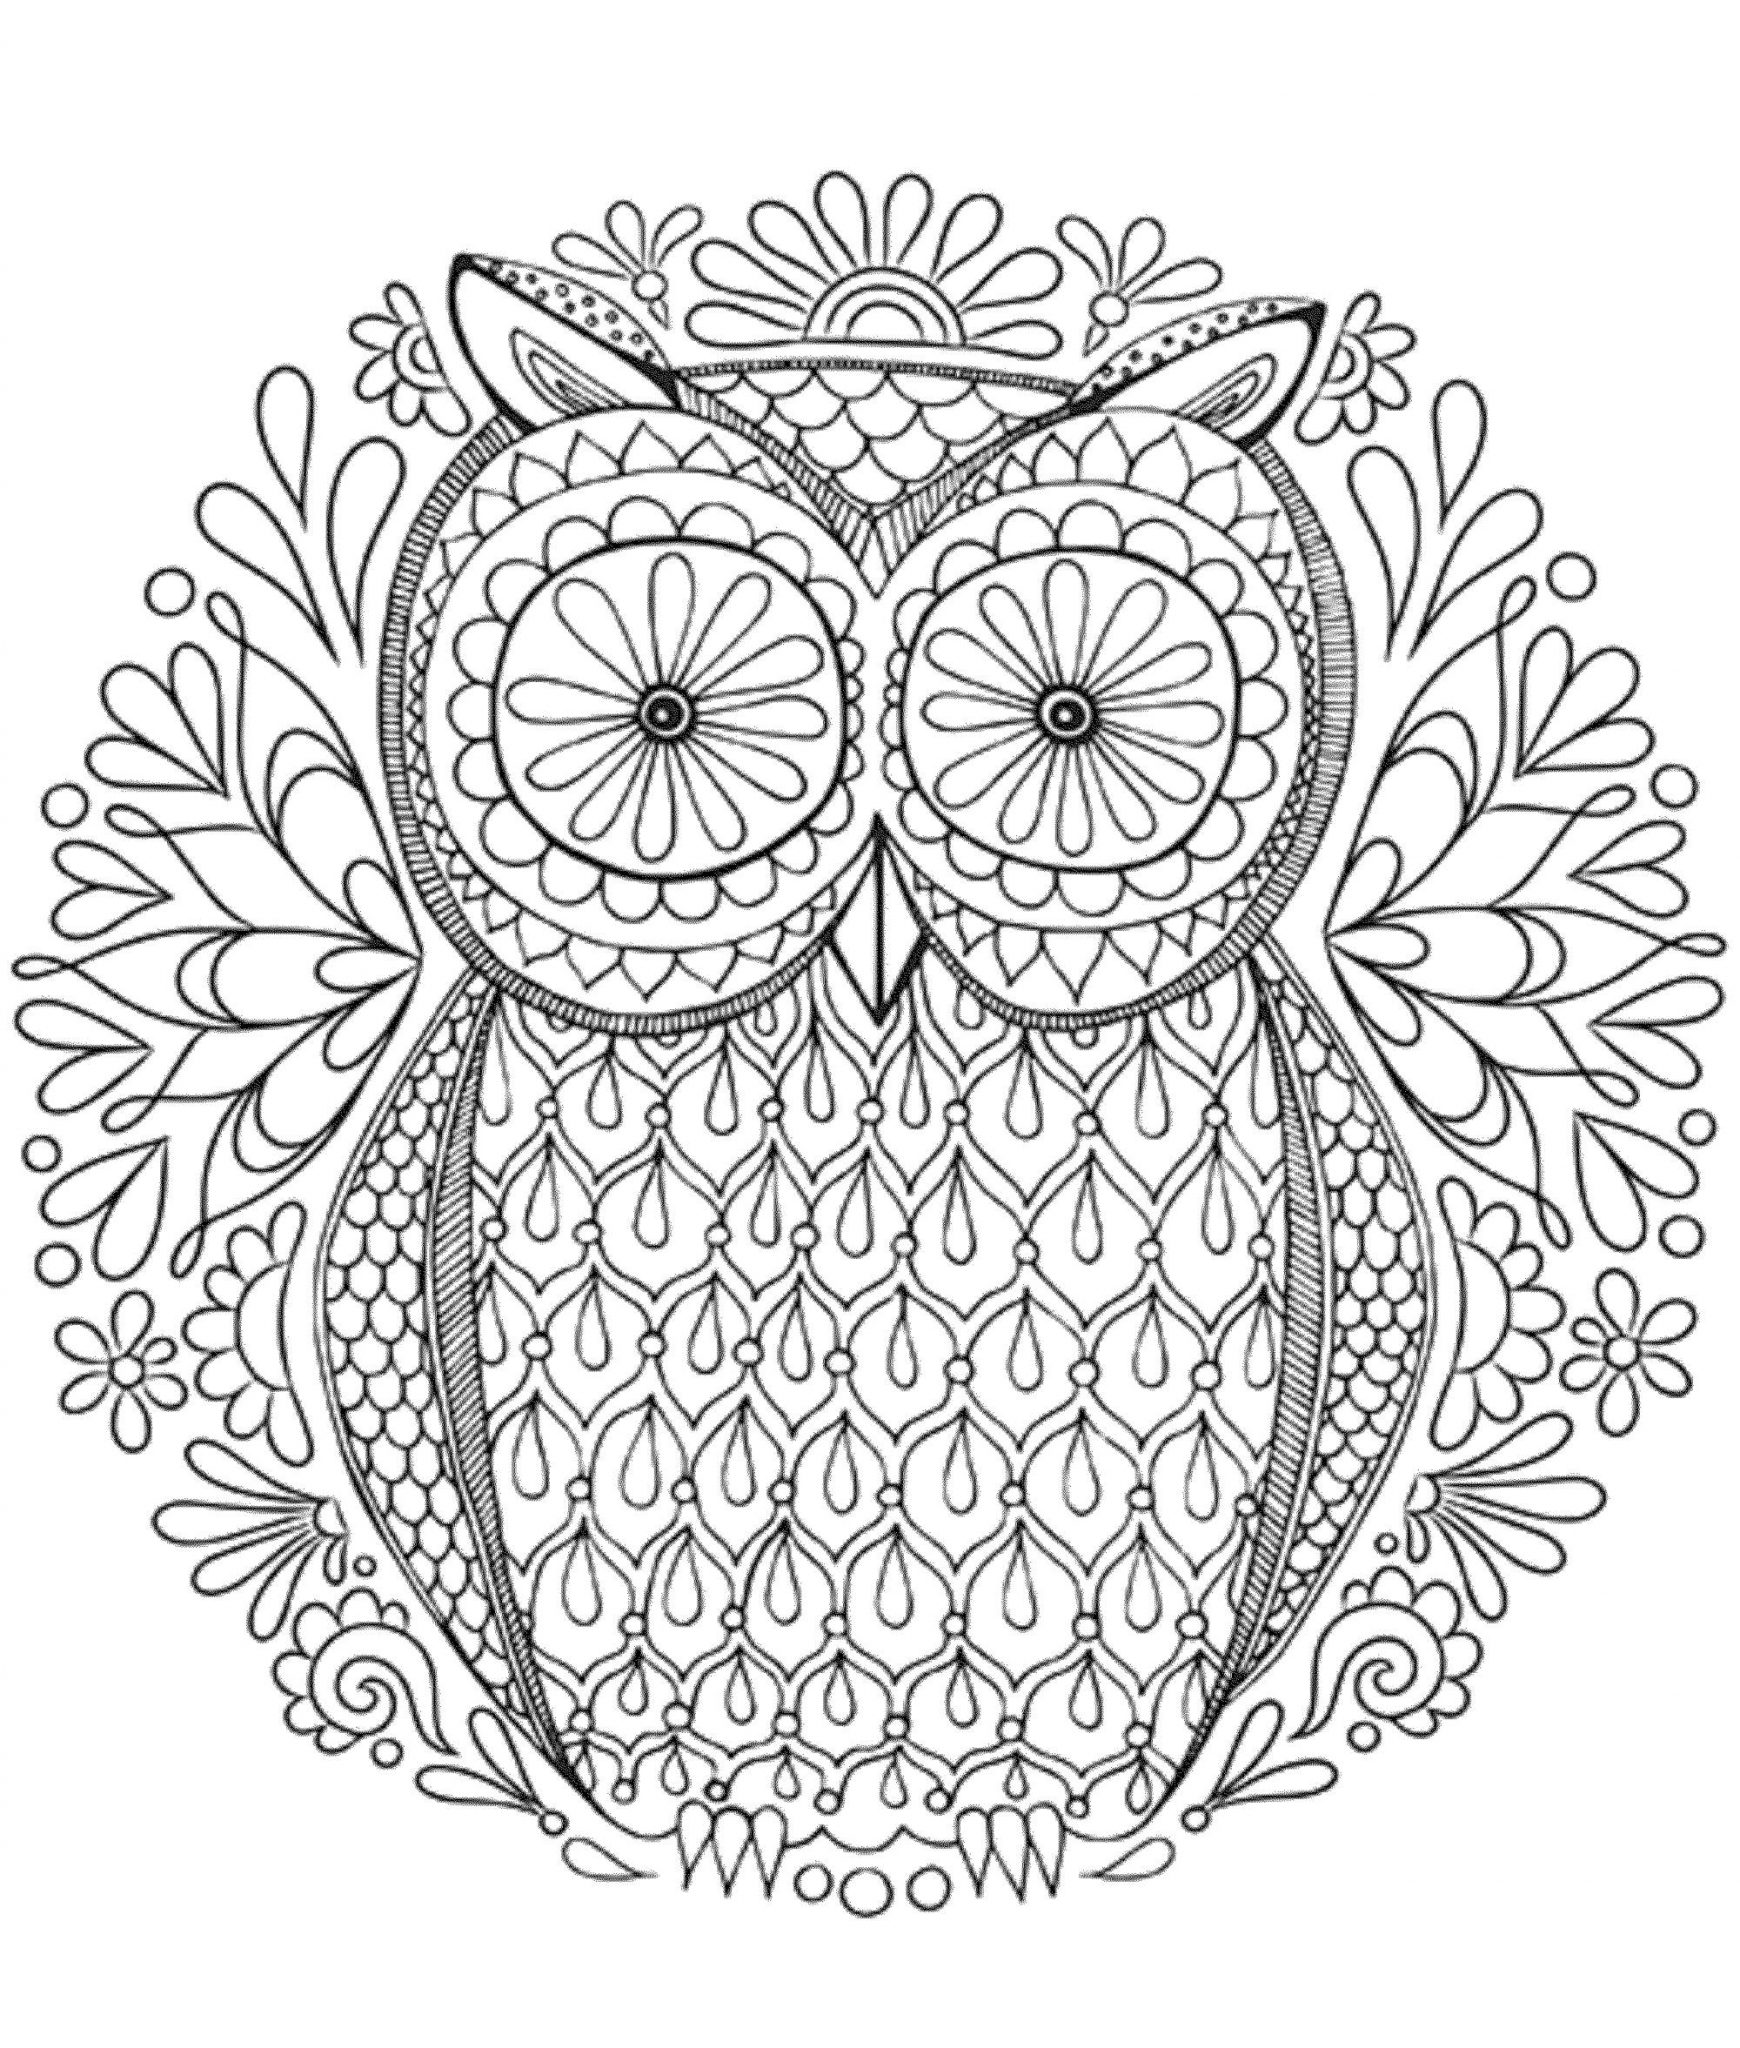 Download owl-coloring-pages-for-adults-hard | | BestAppsForKids.com